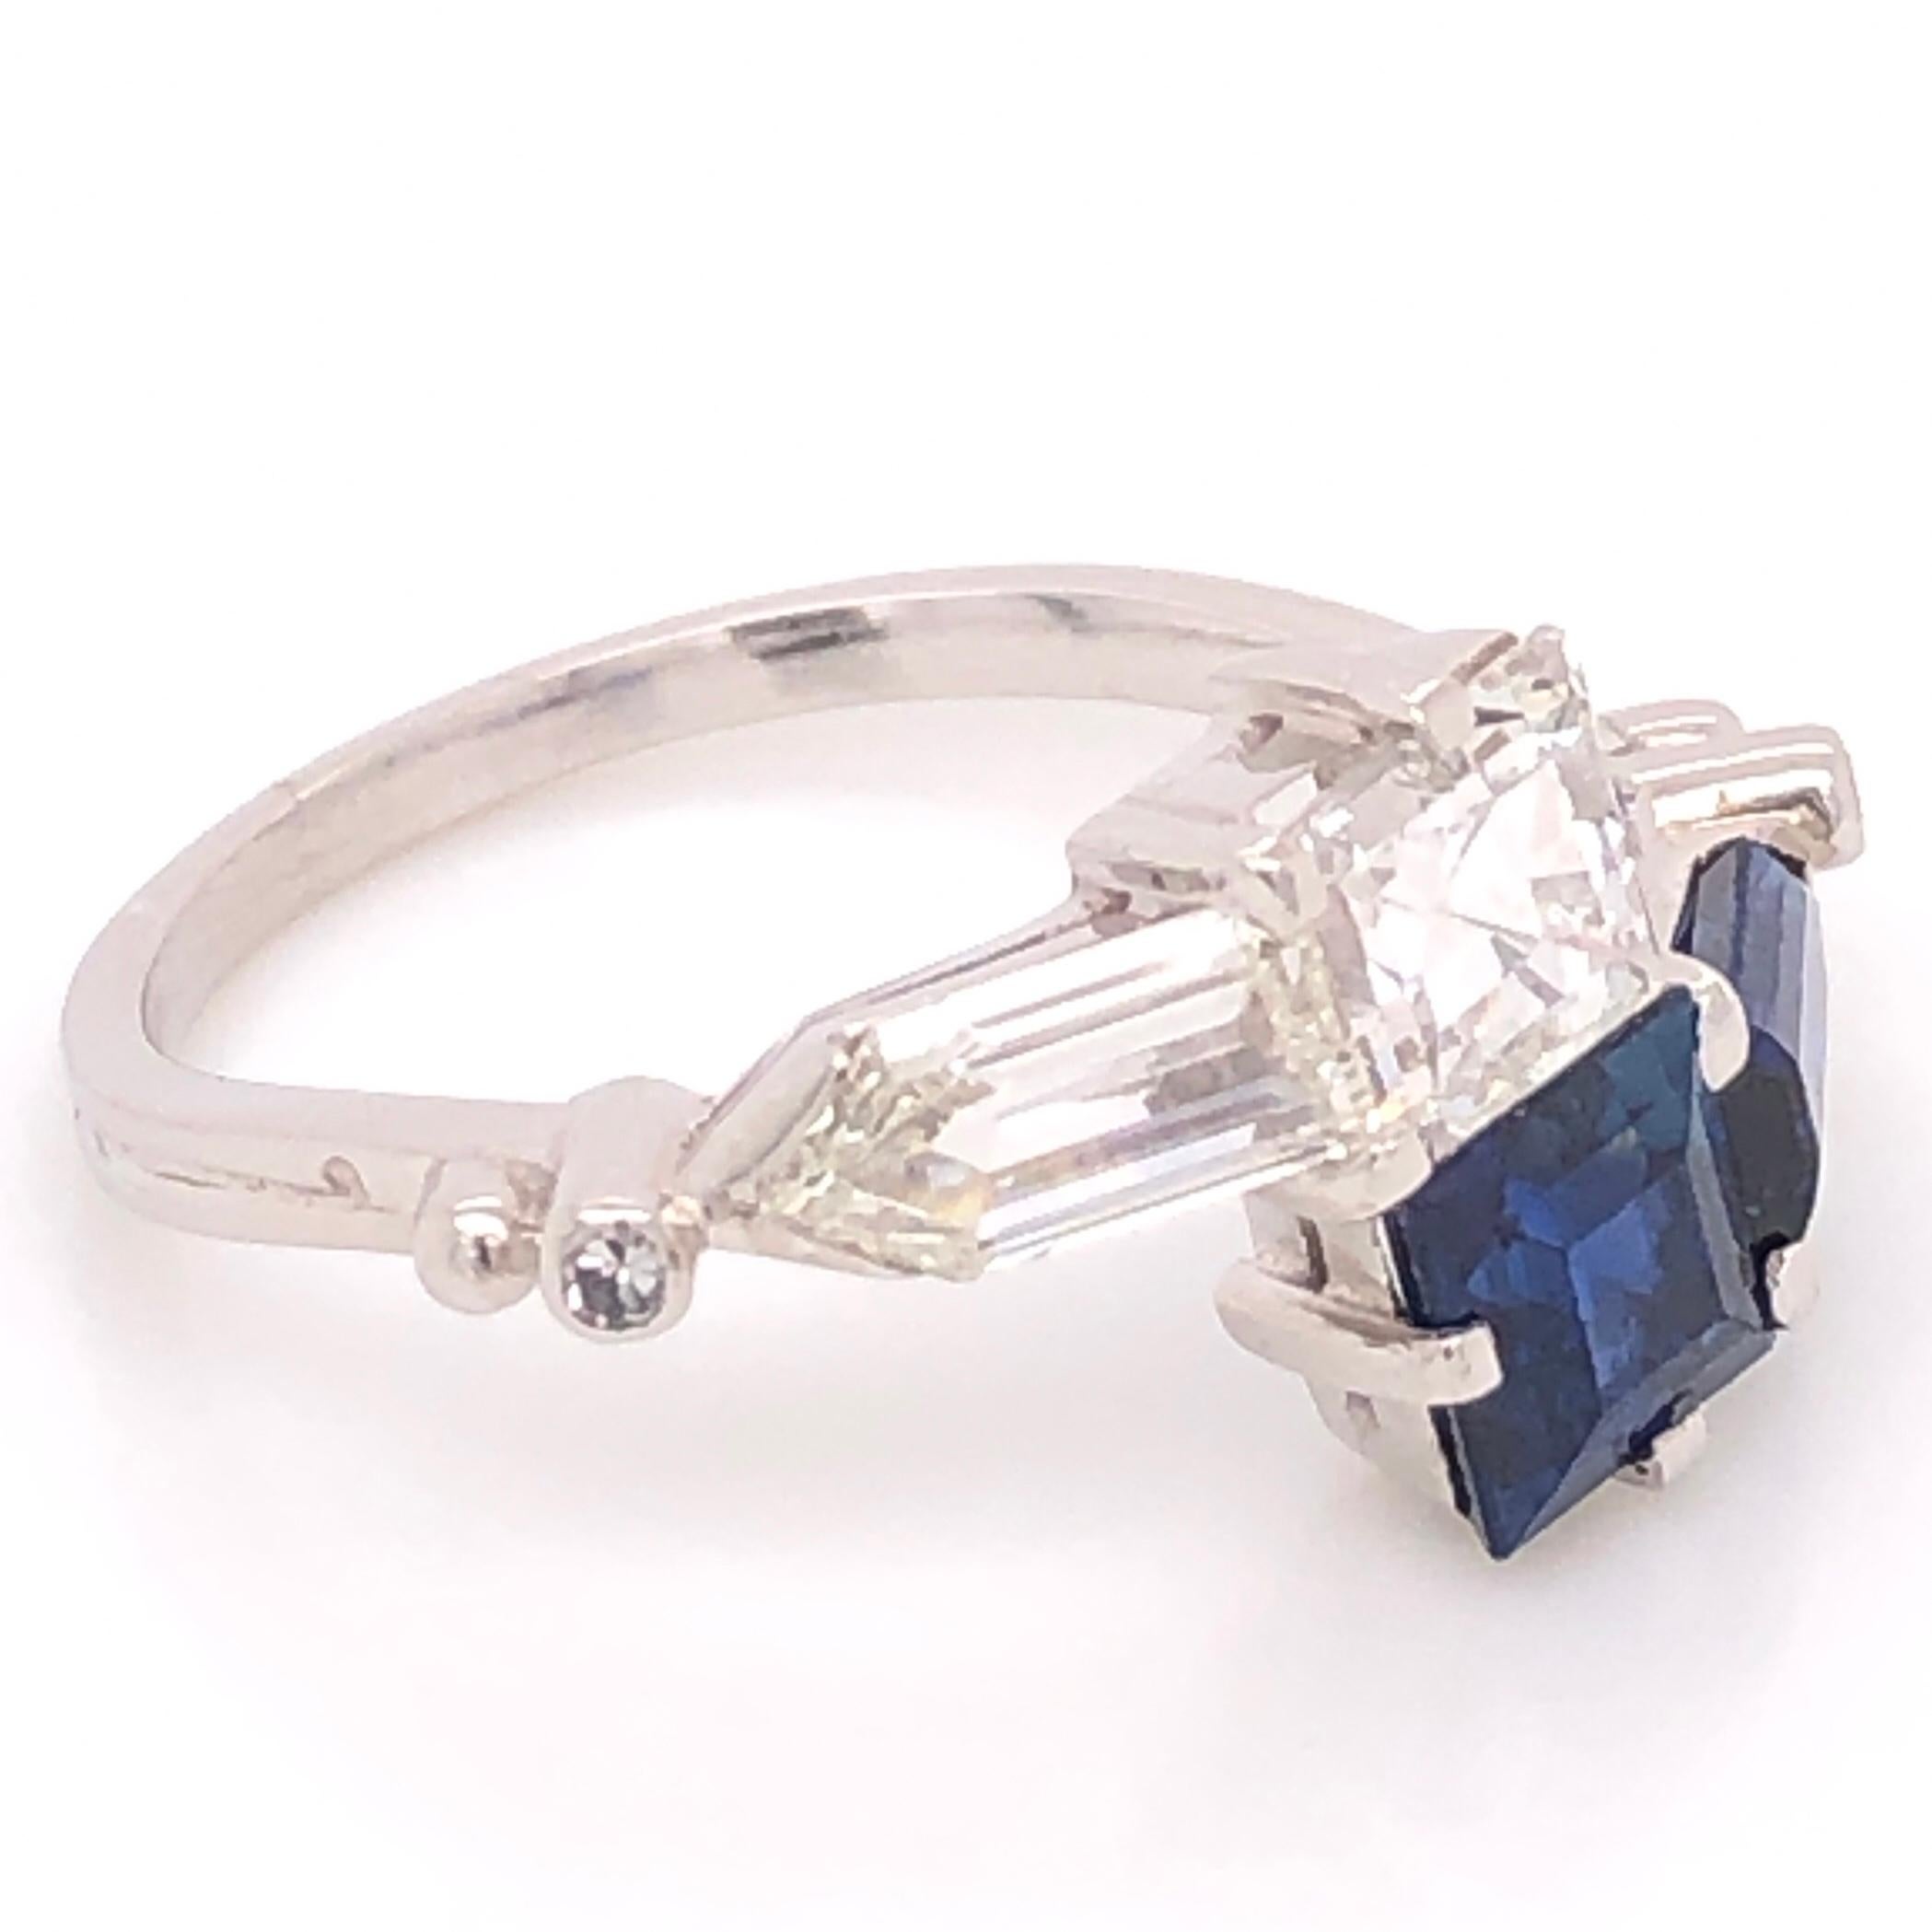 Classic and finely detailed Bypass Ring securely set with Blue Sapphires weighing approx. 2.00 Carat total weight and Diamonds, weighing approx. 0.96 and 0.72 carats. Hand crafted Platinum mounting. Ring size 8, resizing available. This Simple and